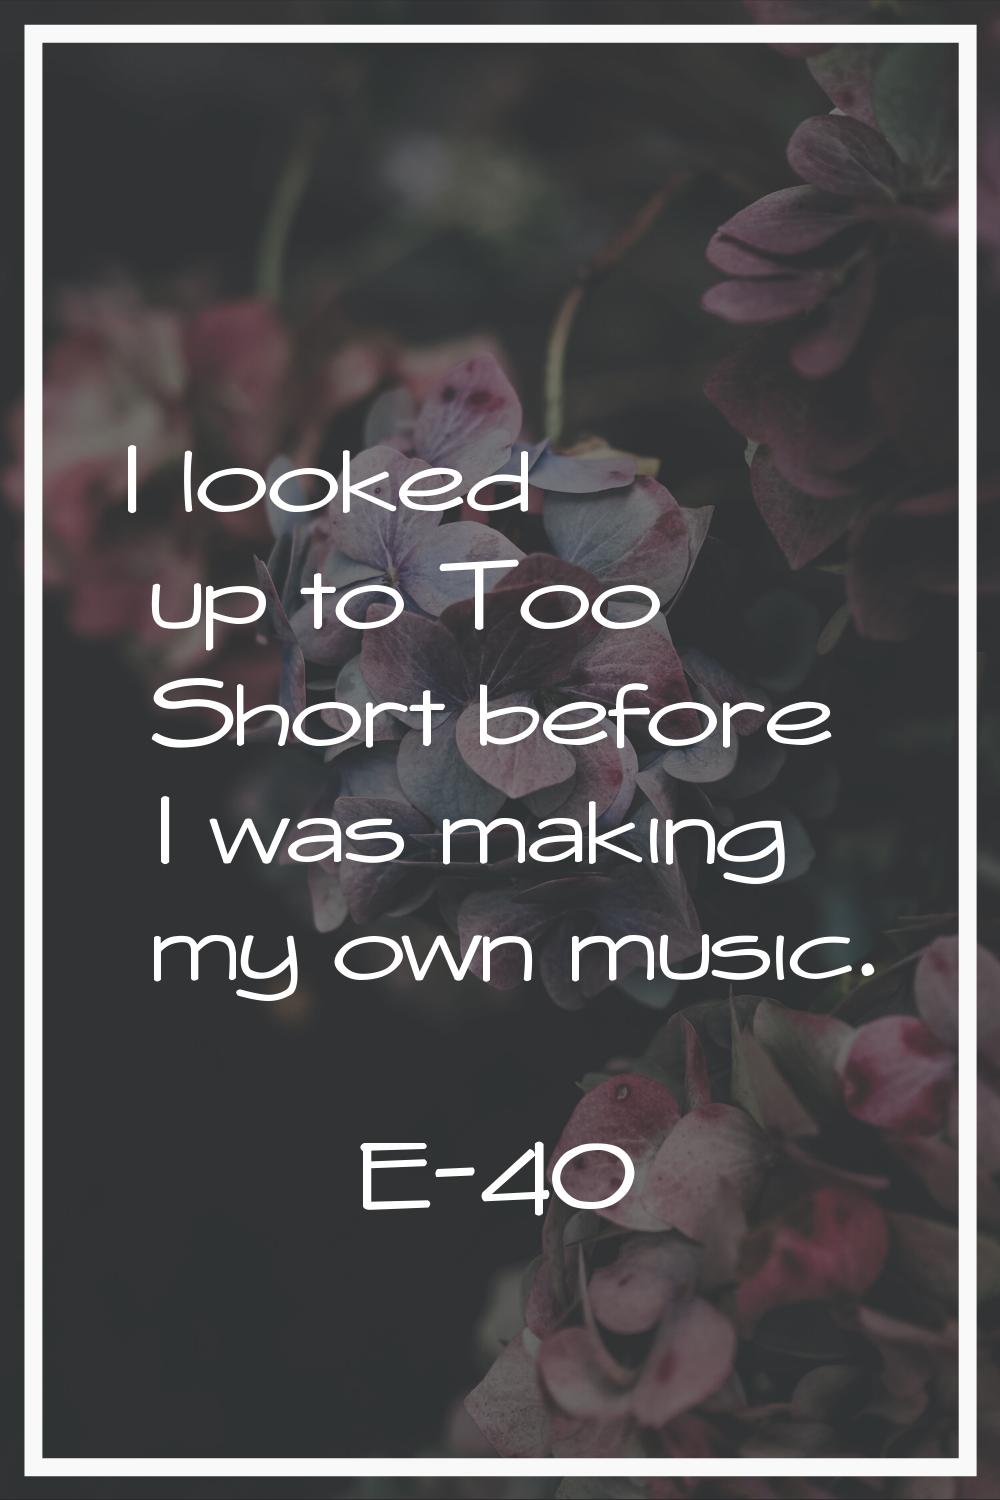 I looked up to Too Short before I was making my own music.